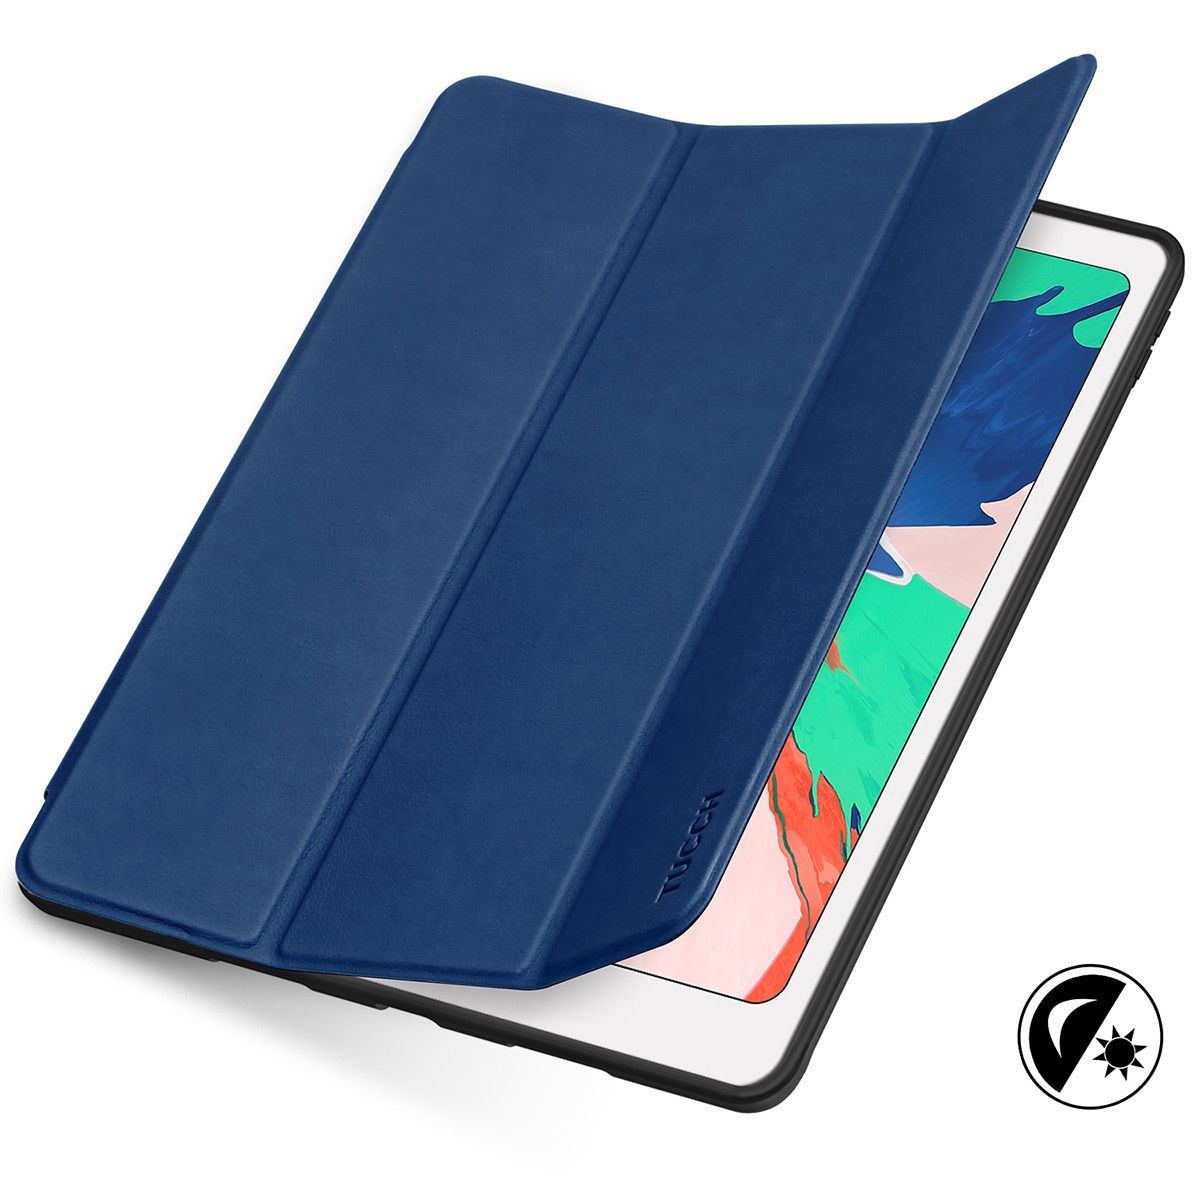  Twelve South BookBook for iPad Air/Pro 10.5  Hardback Leather  case, Pencil Storage and Easel for iPad Pro/Air + Apple Pencil : Automotive